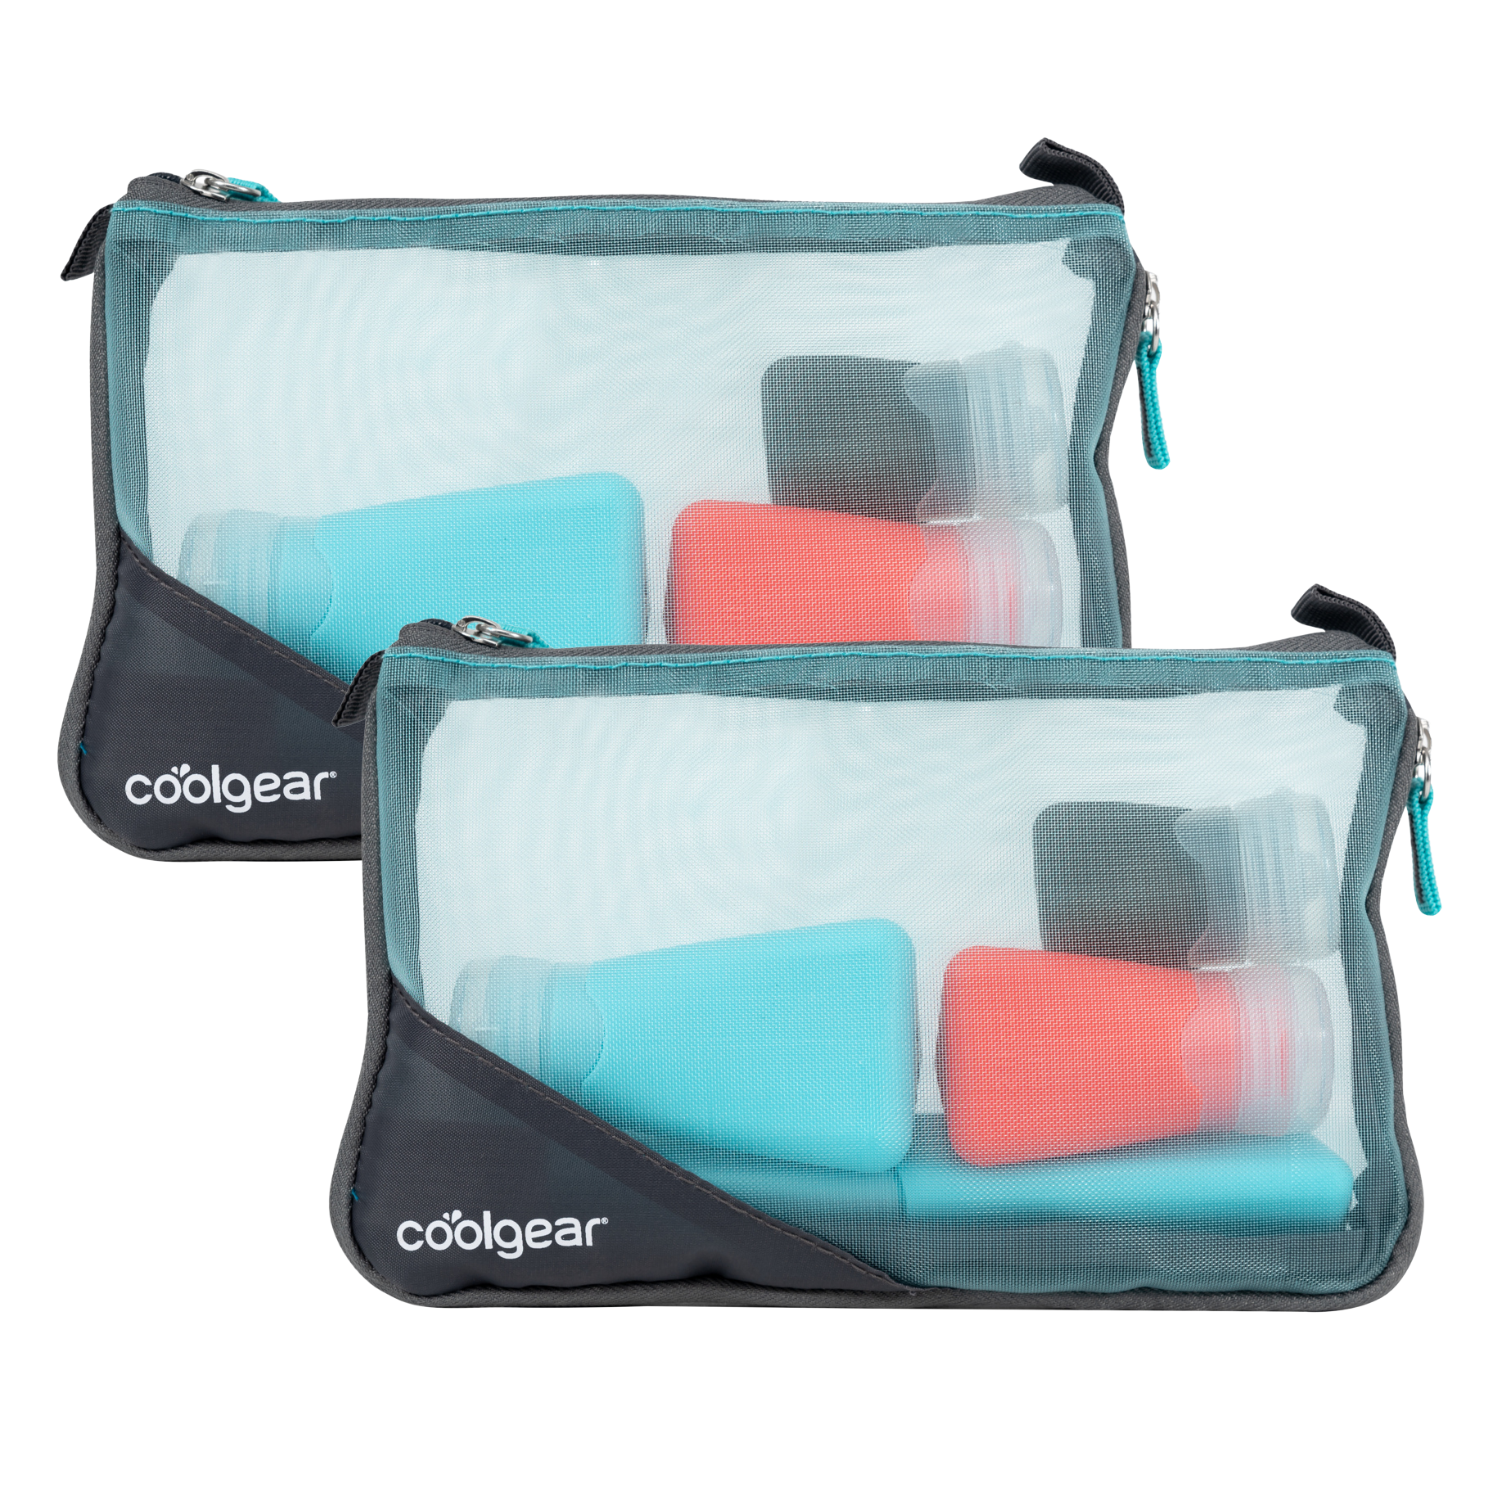 COOL GEAR 2-Pack TSA-Approved 5-Piece Travel Kit Toiletries with